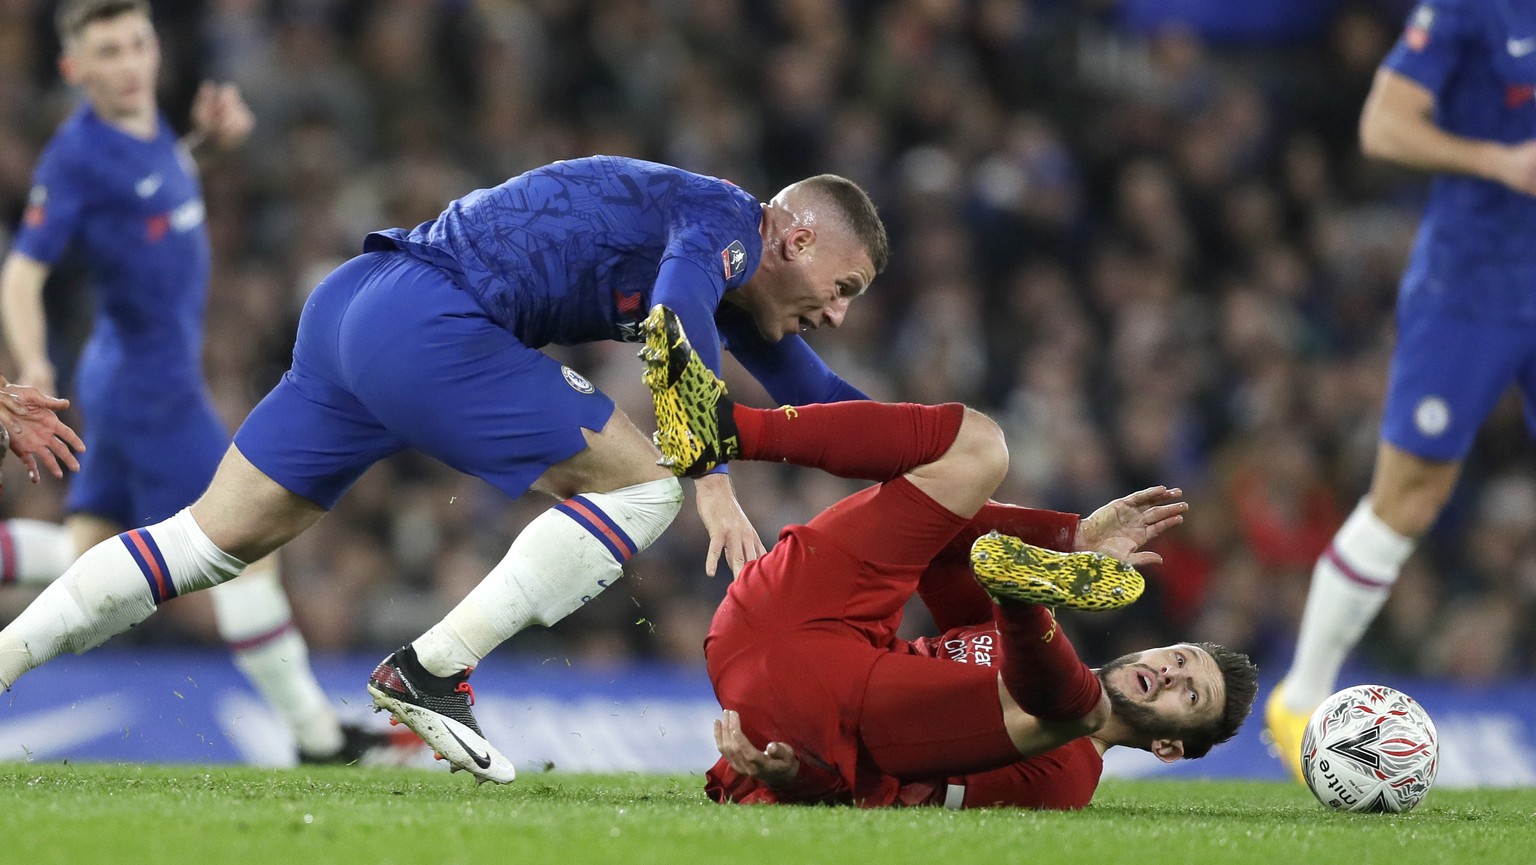 Liverpool&#039;s Adam Lallana falls as Chelsea&#039;s Ross Barkley, left, watches during the English FA Cup fifth round soccer match between Chelsea and Liverpool at Stamford Bridge stadium in London  ...